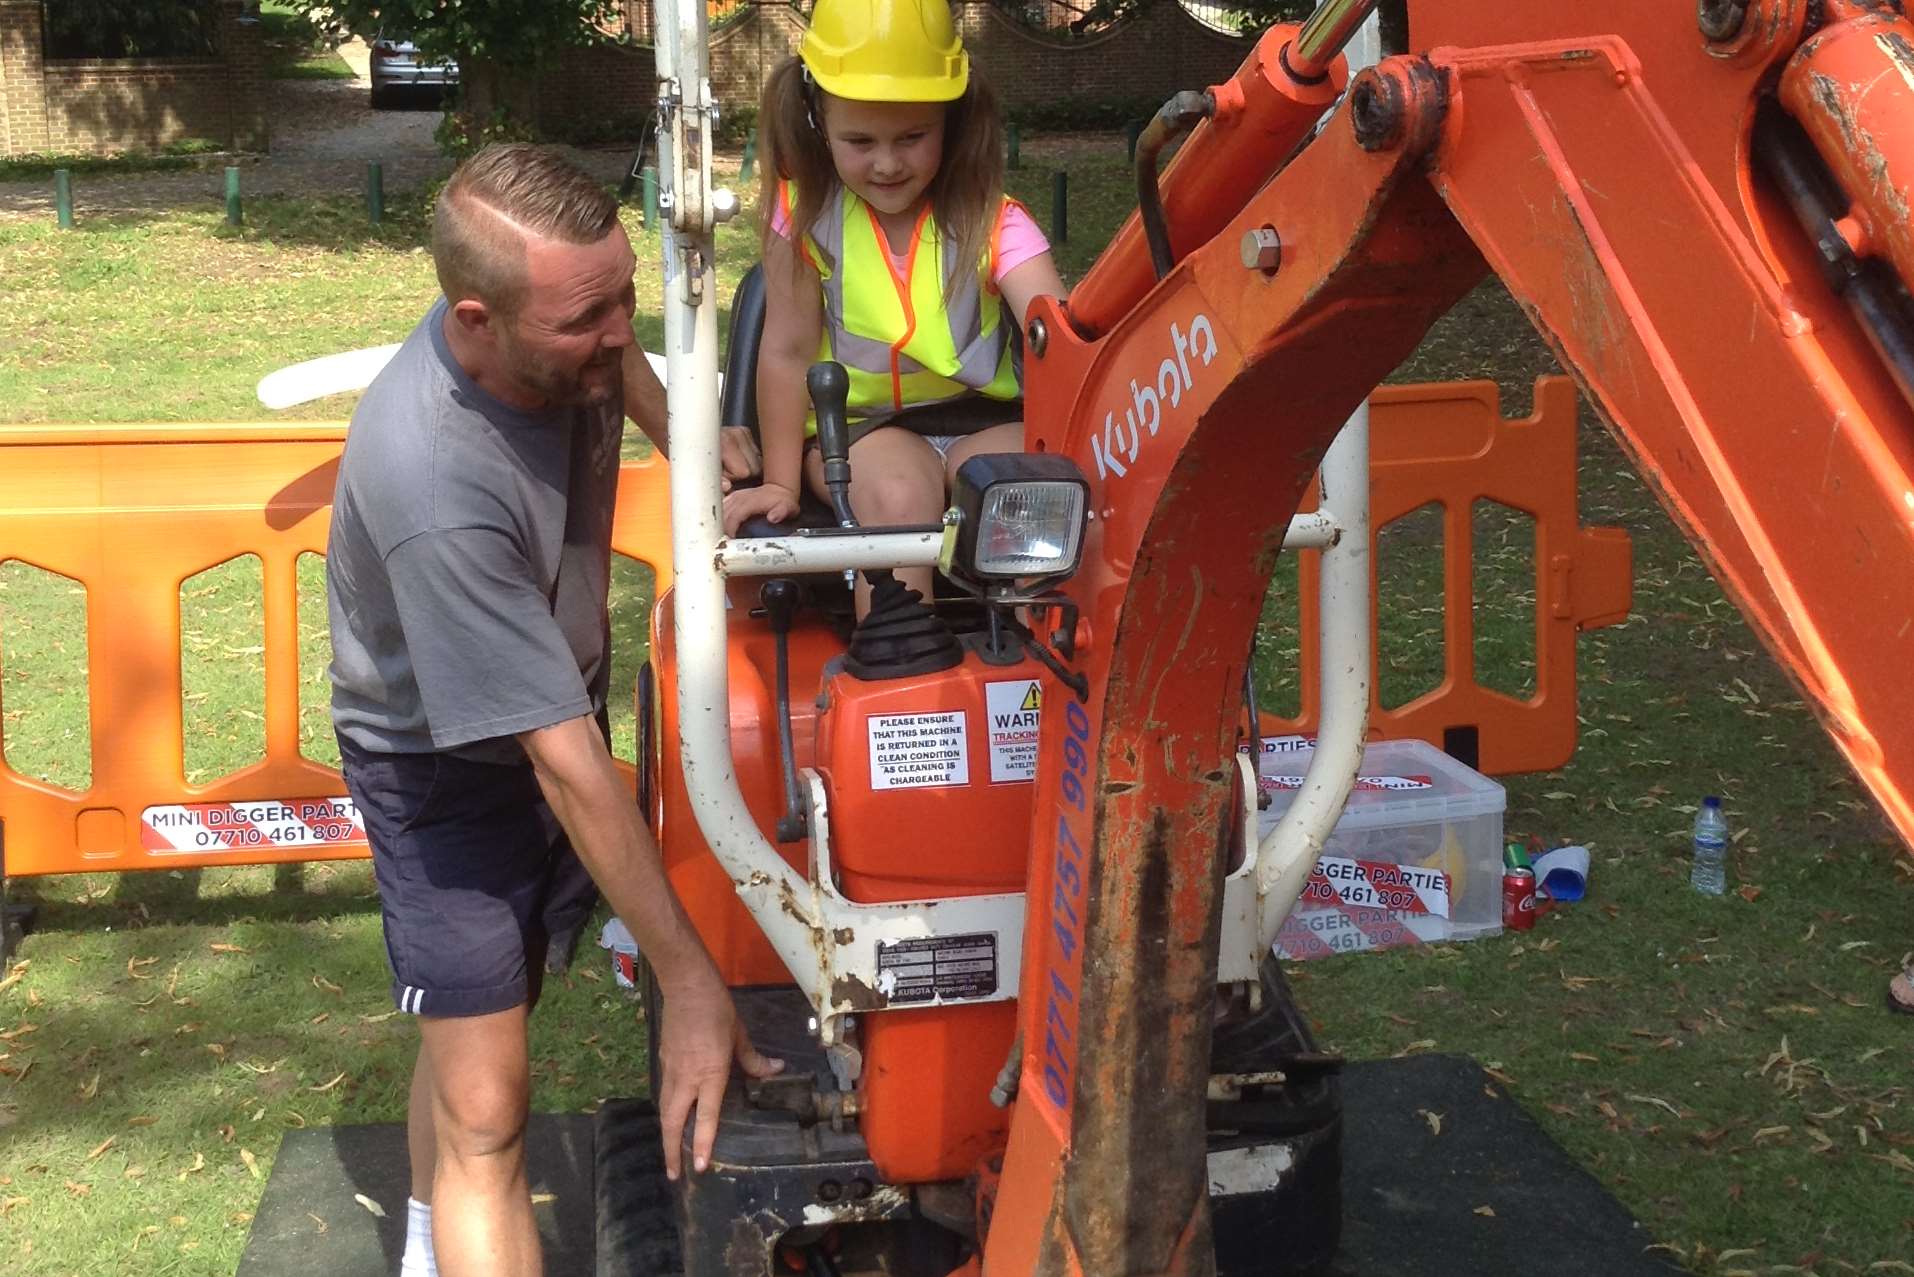 Youngsters can clamber aboard the machines in mini digger parties